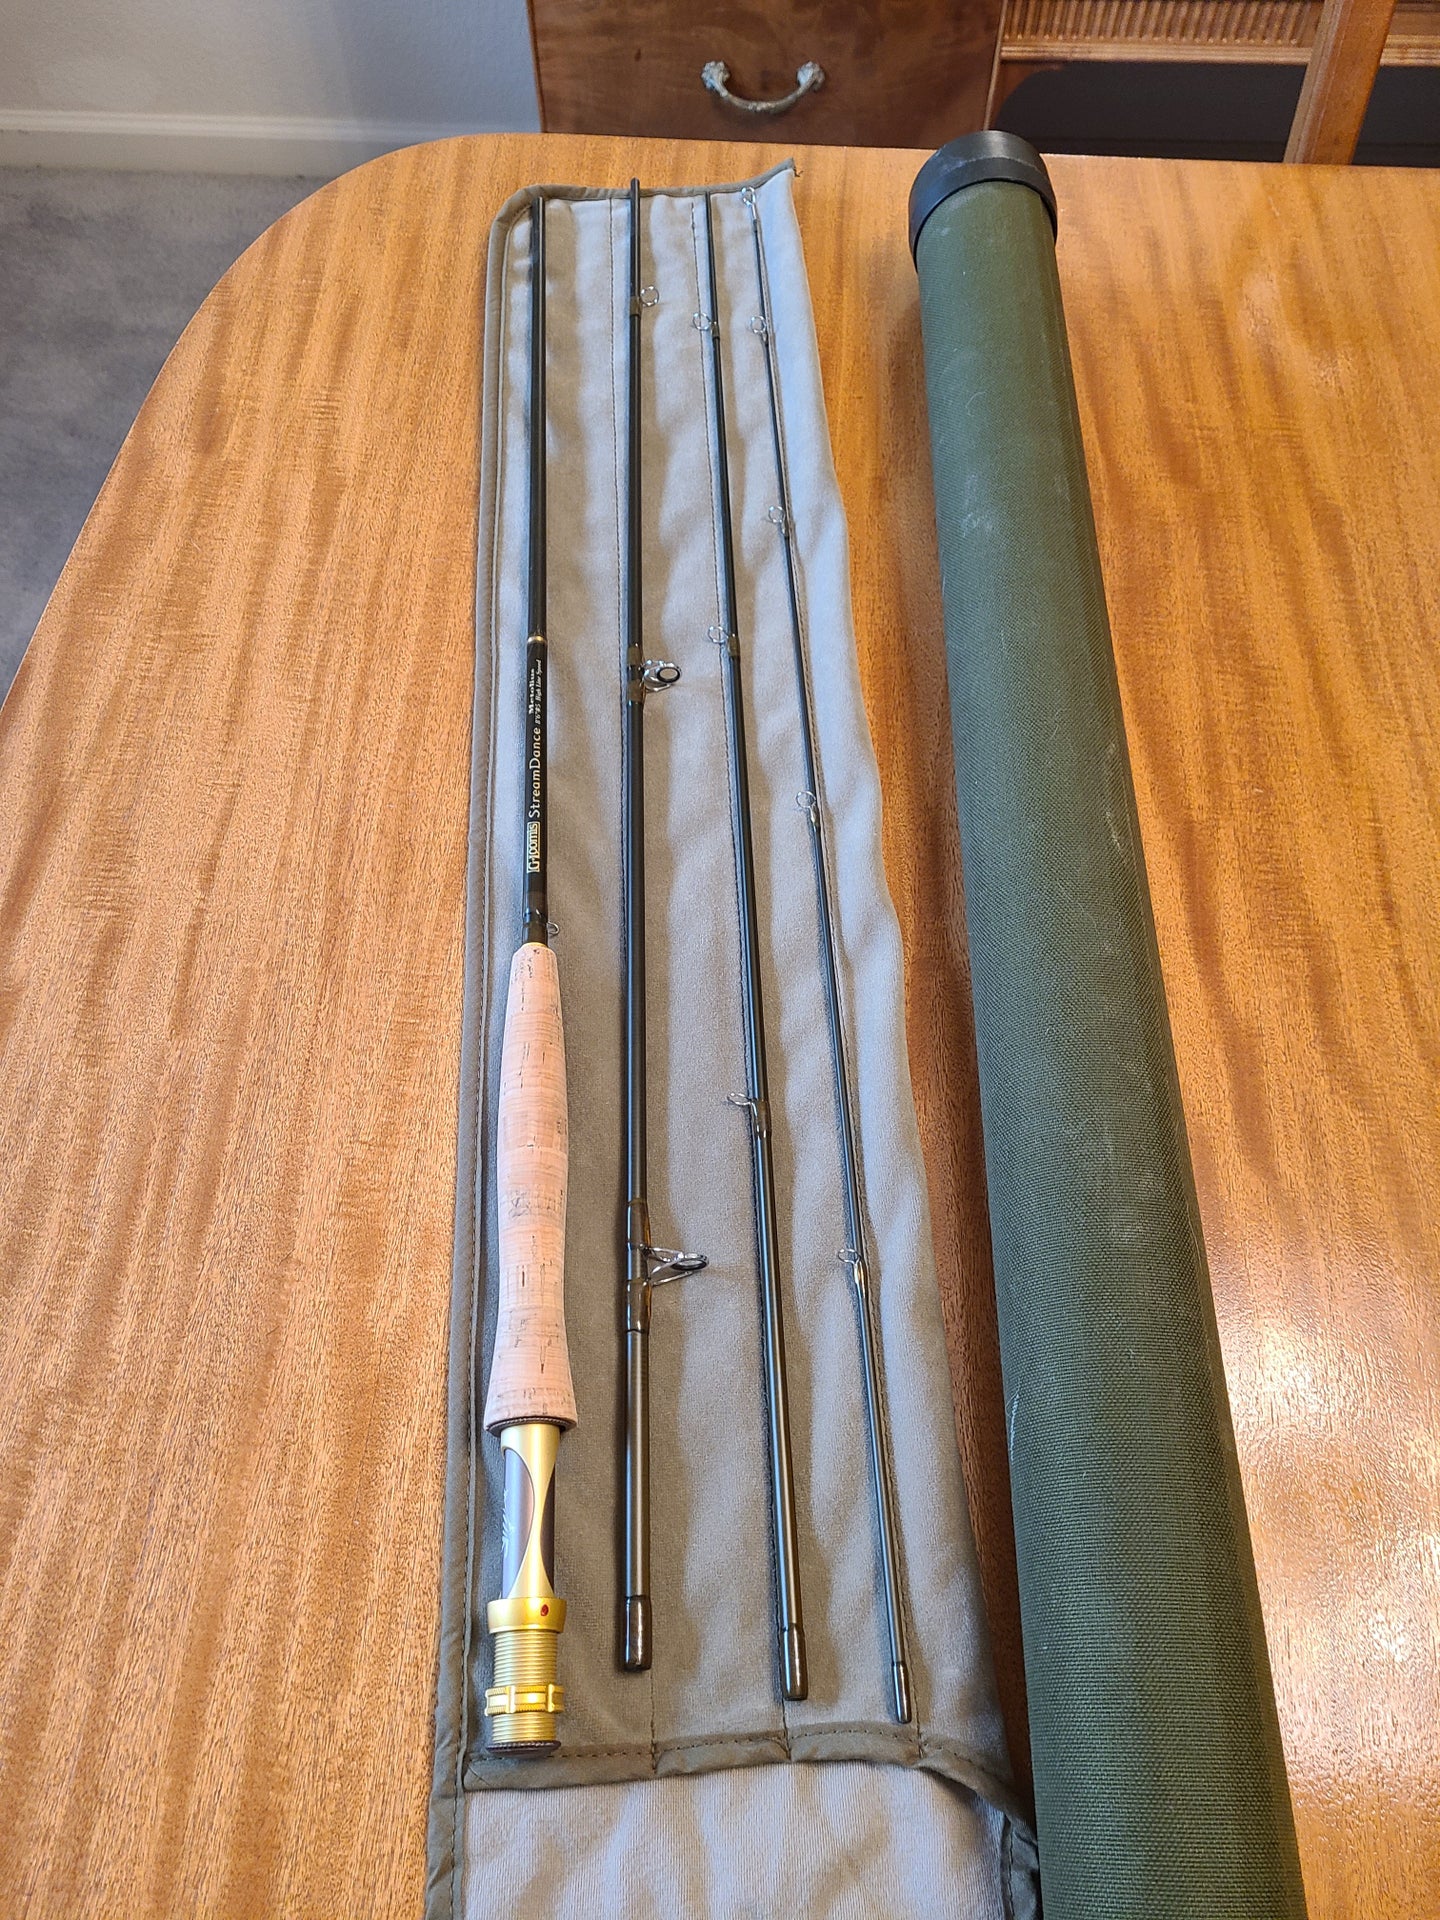 FS - Used Fly Rods and Reels for Sale